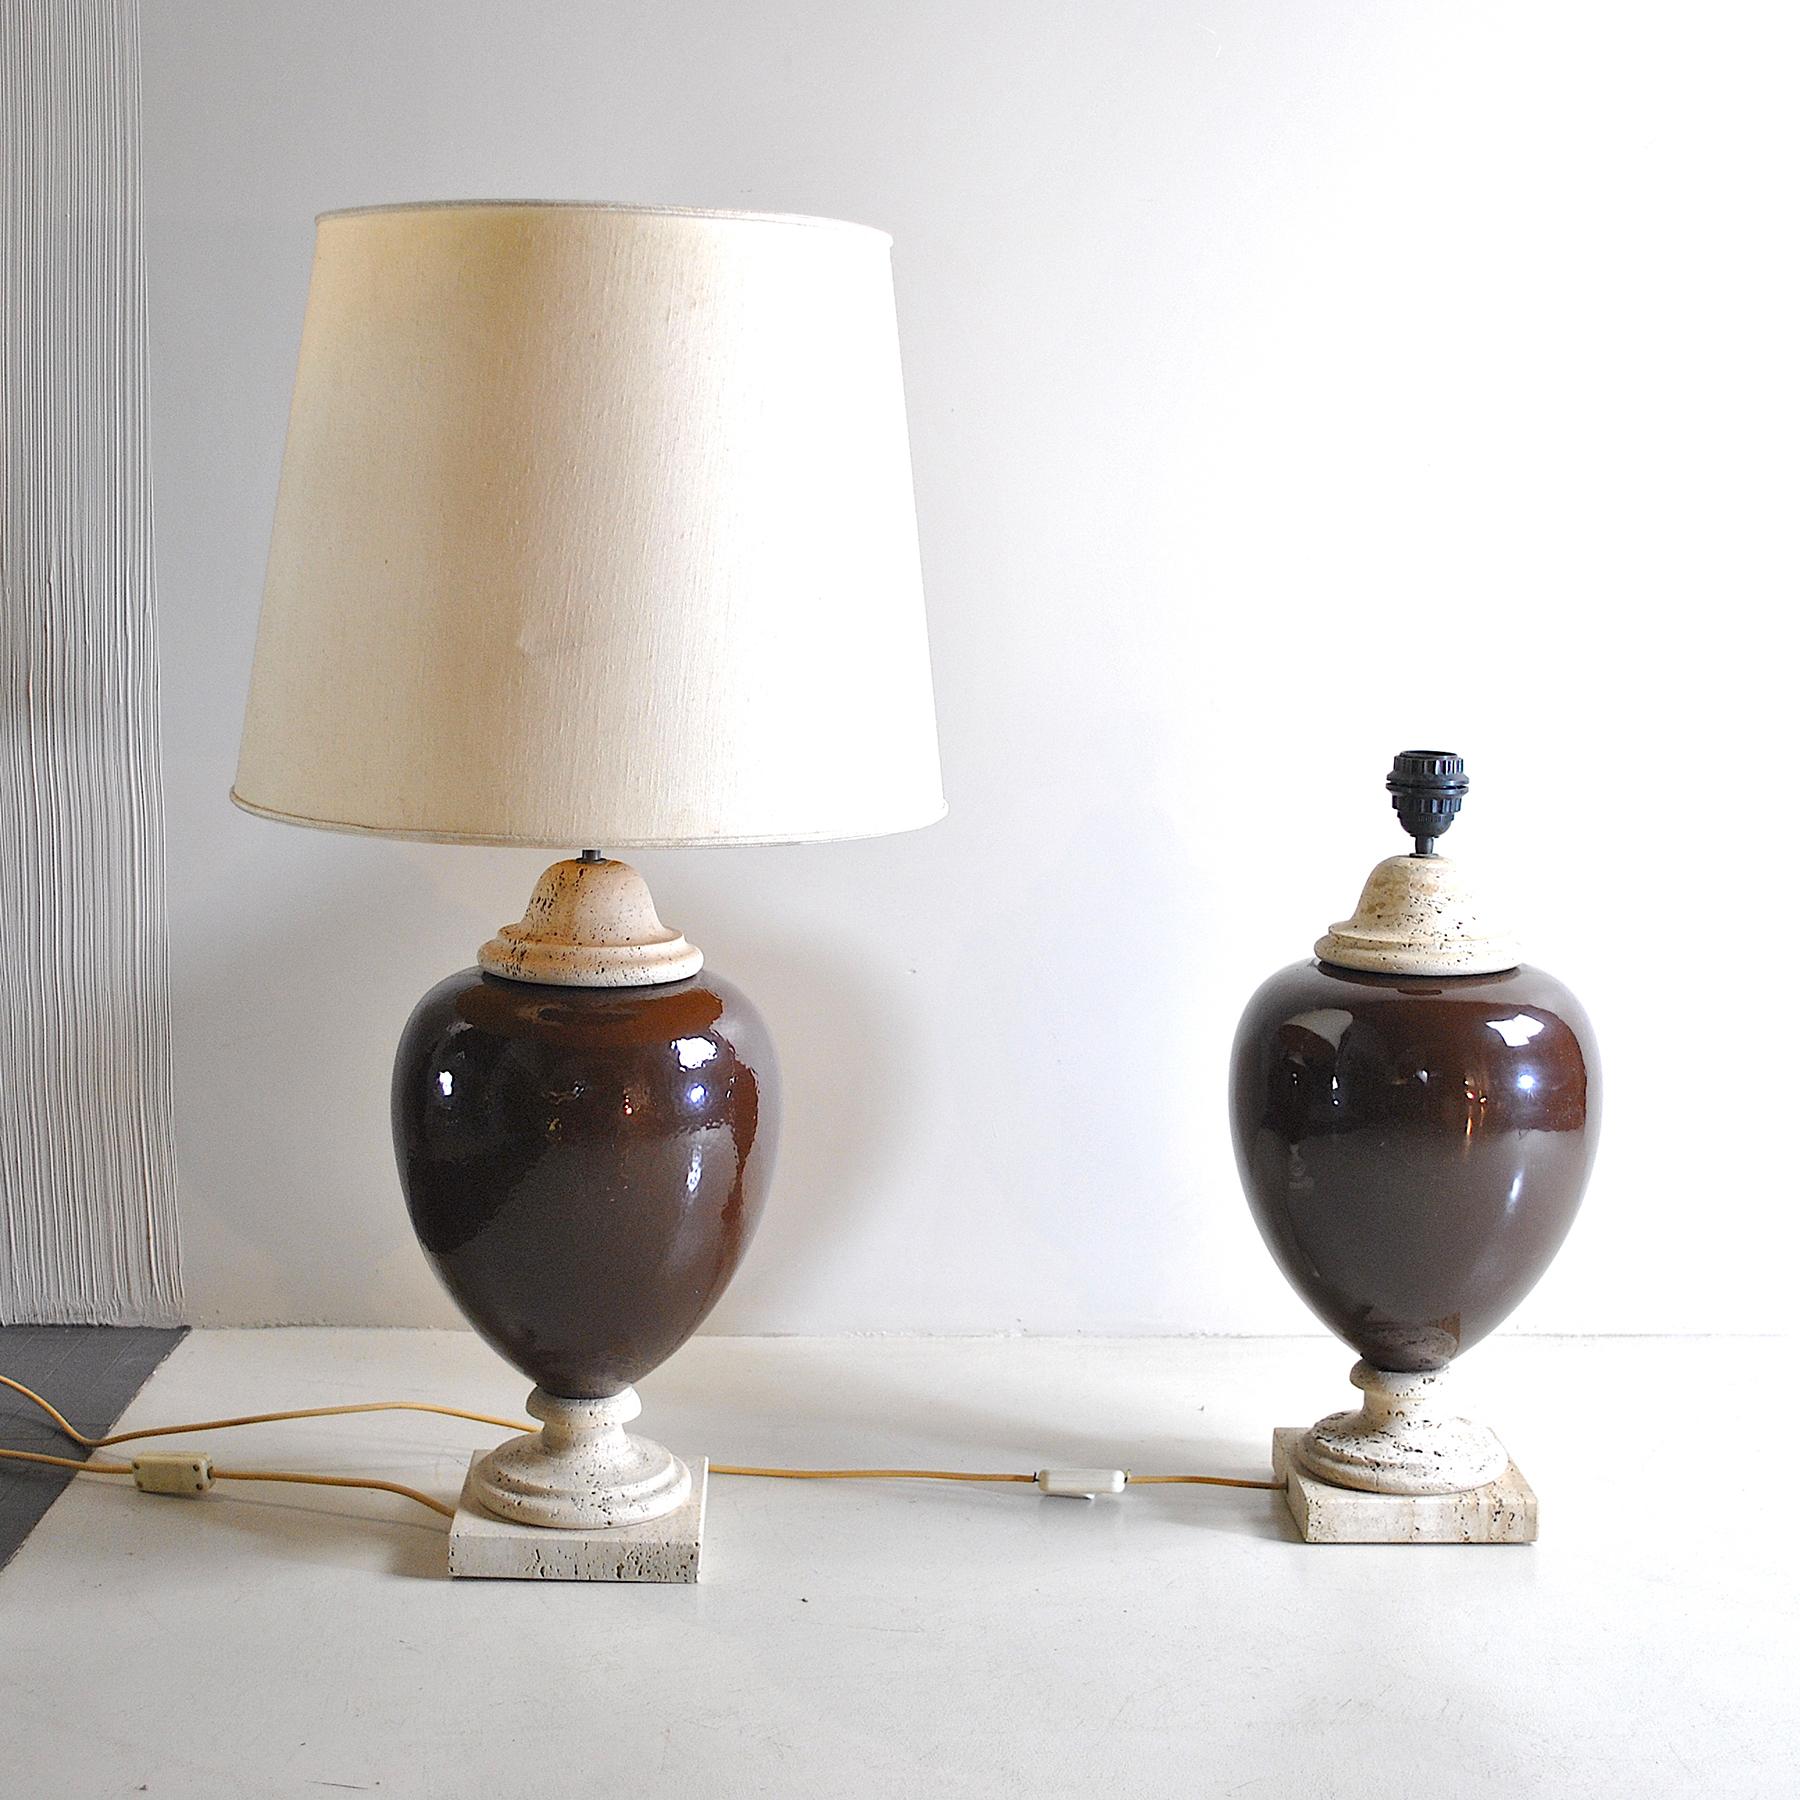 Pair of 1960s table lamps in brown glazed ceramic with travertine marble bases.

The lamps are sold without the lampshade in the picture, but it can be requested in the form, sizes and colors at will with an extra price.

n.b. the measures in